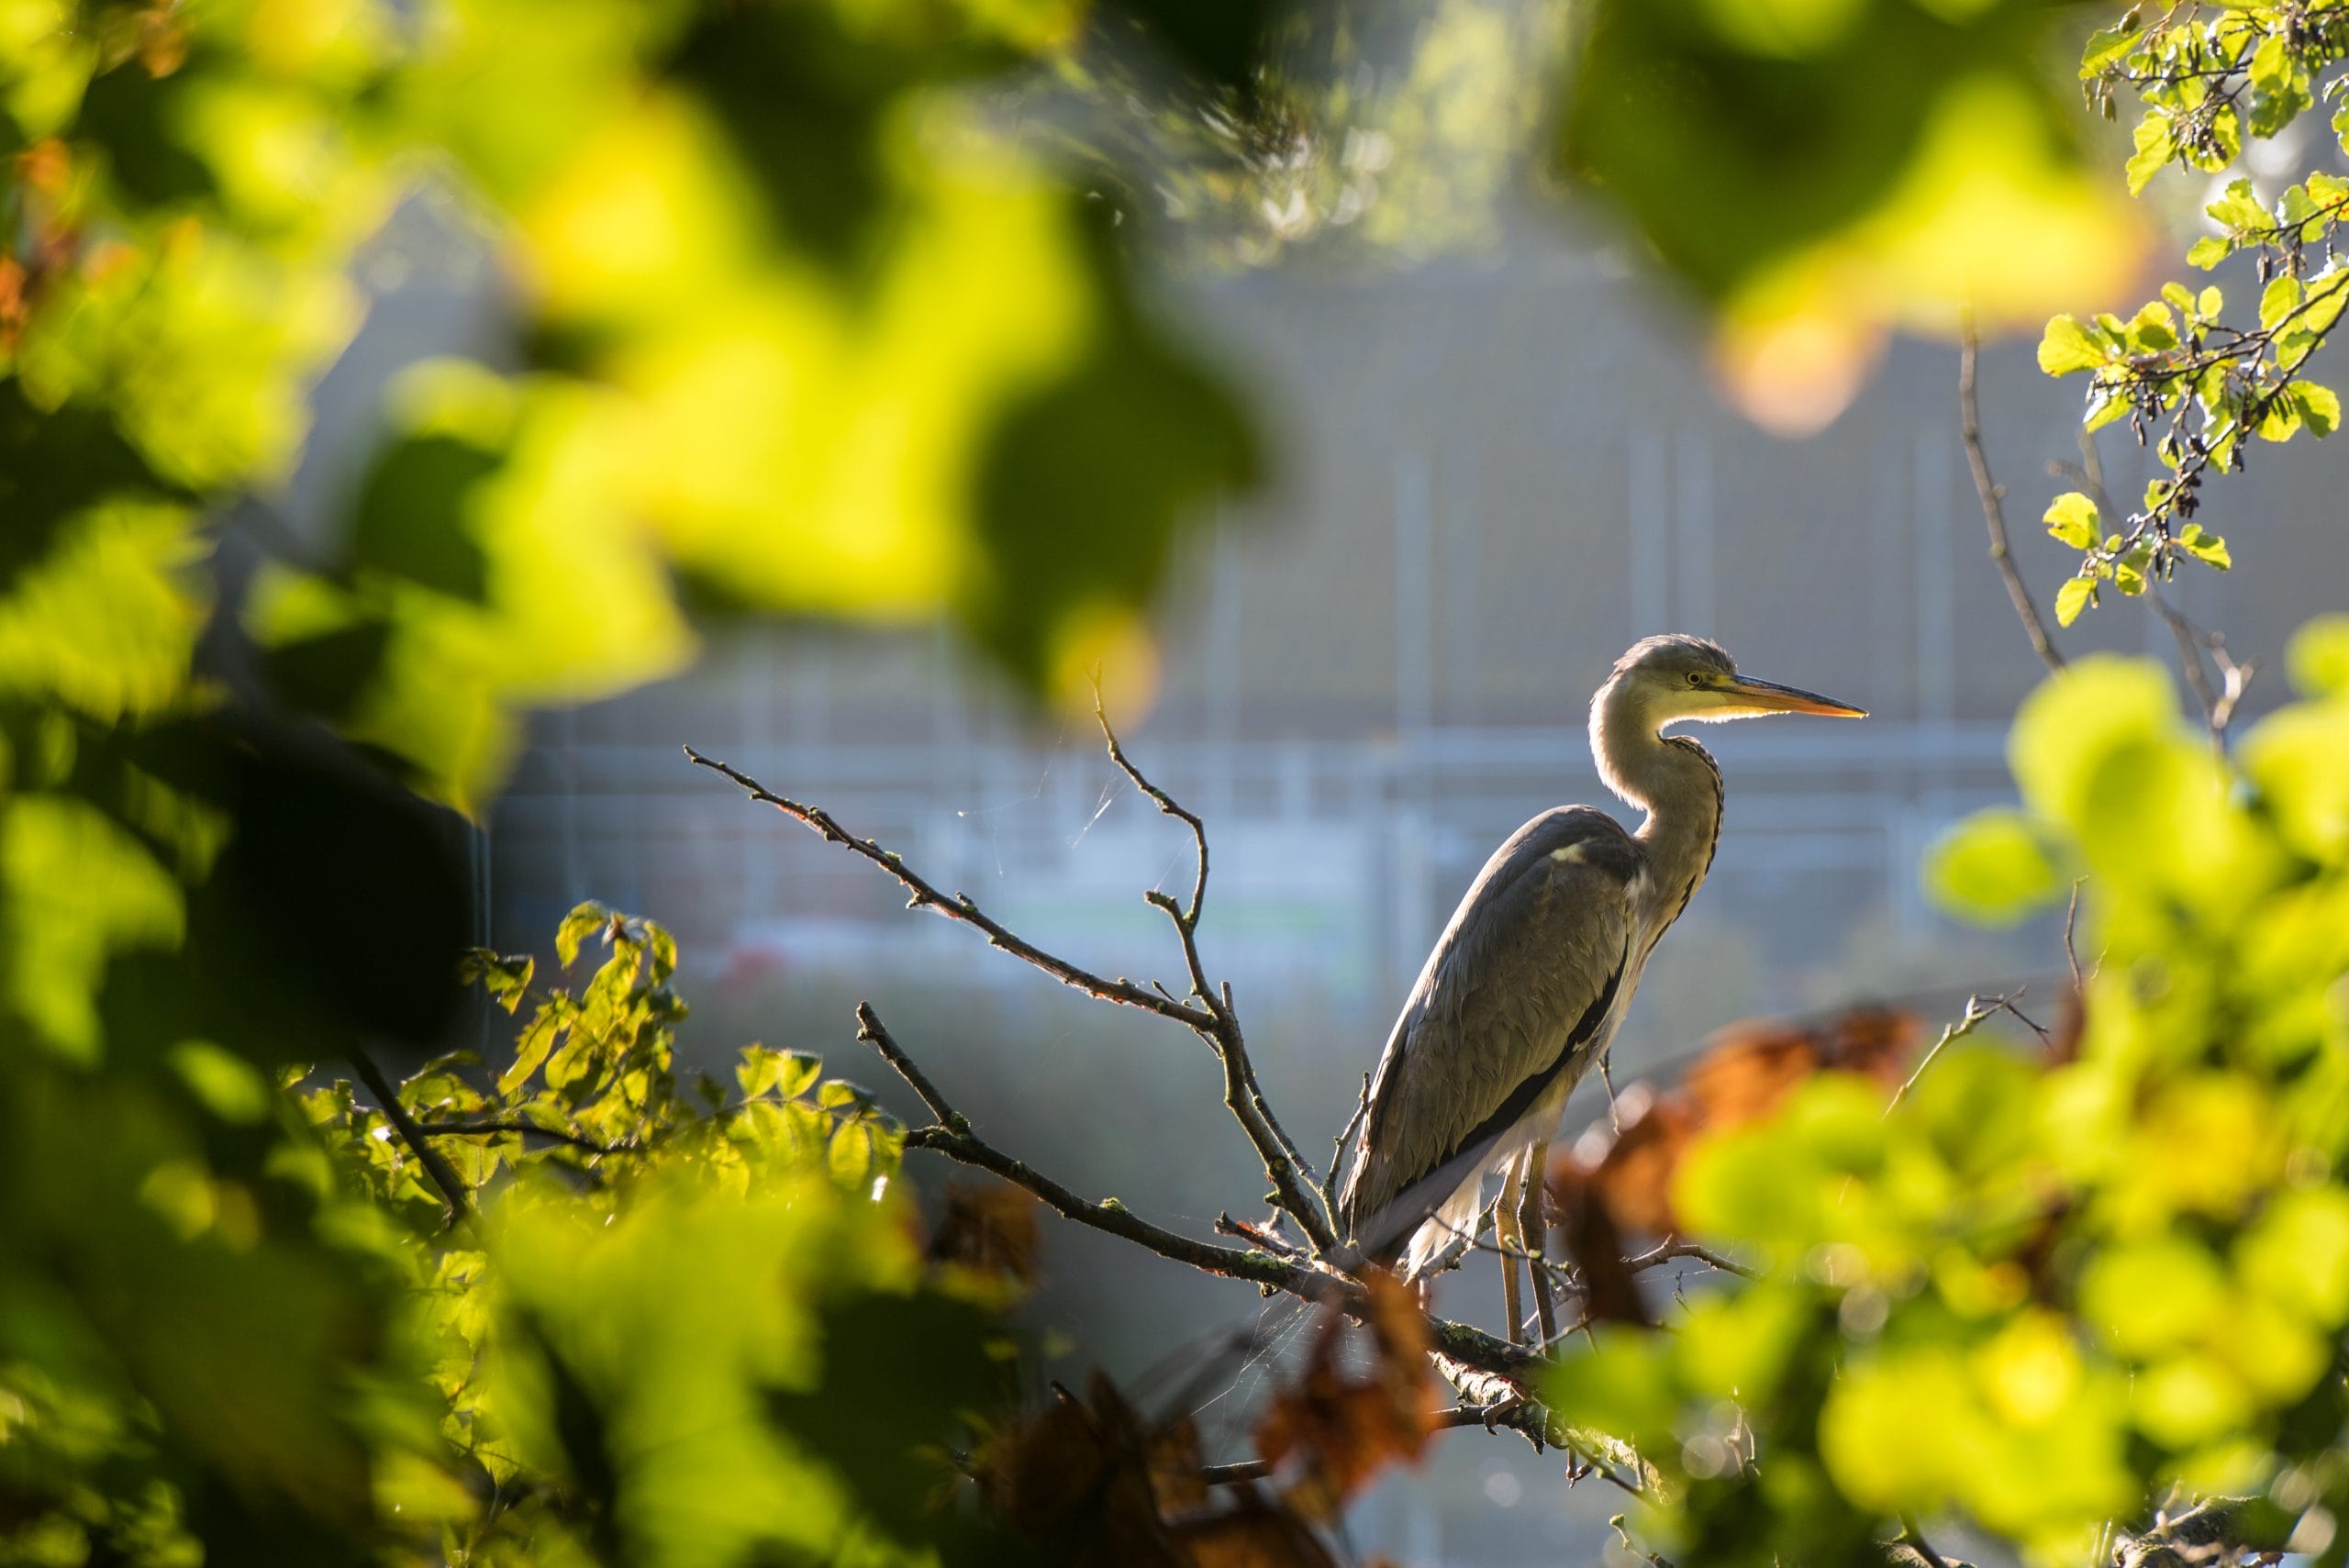 A heron sits on a branch